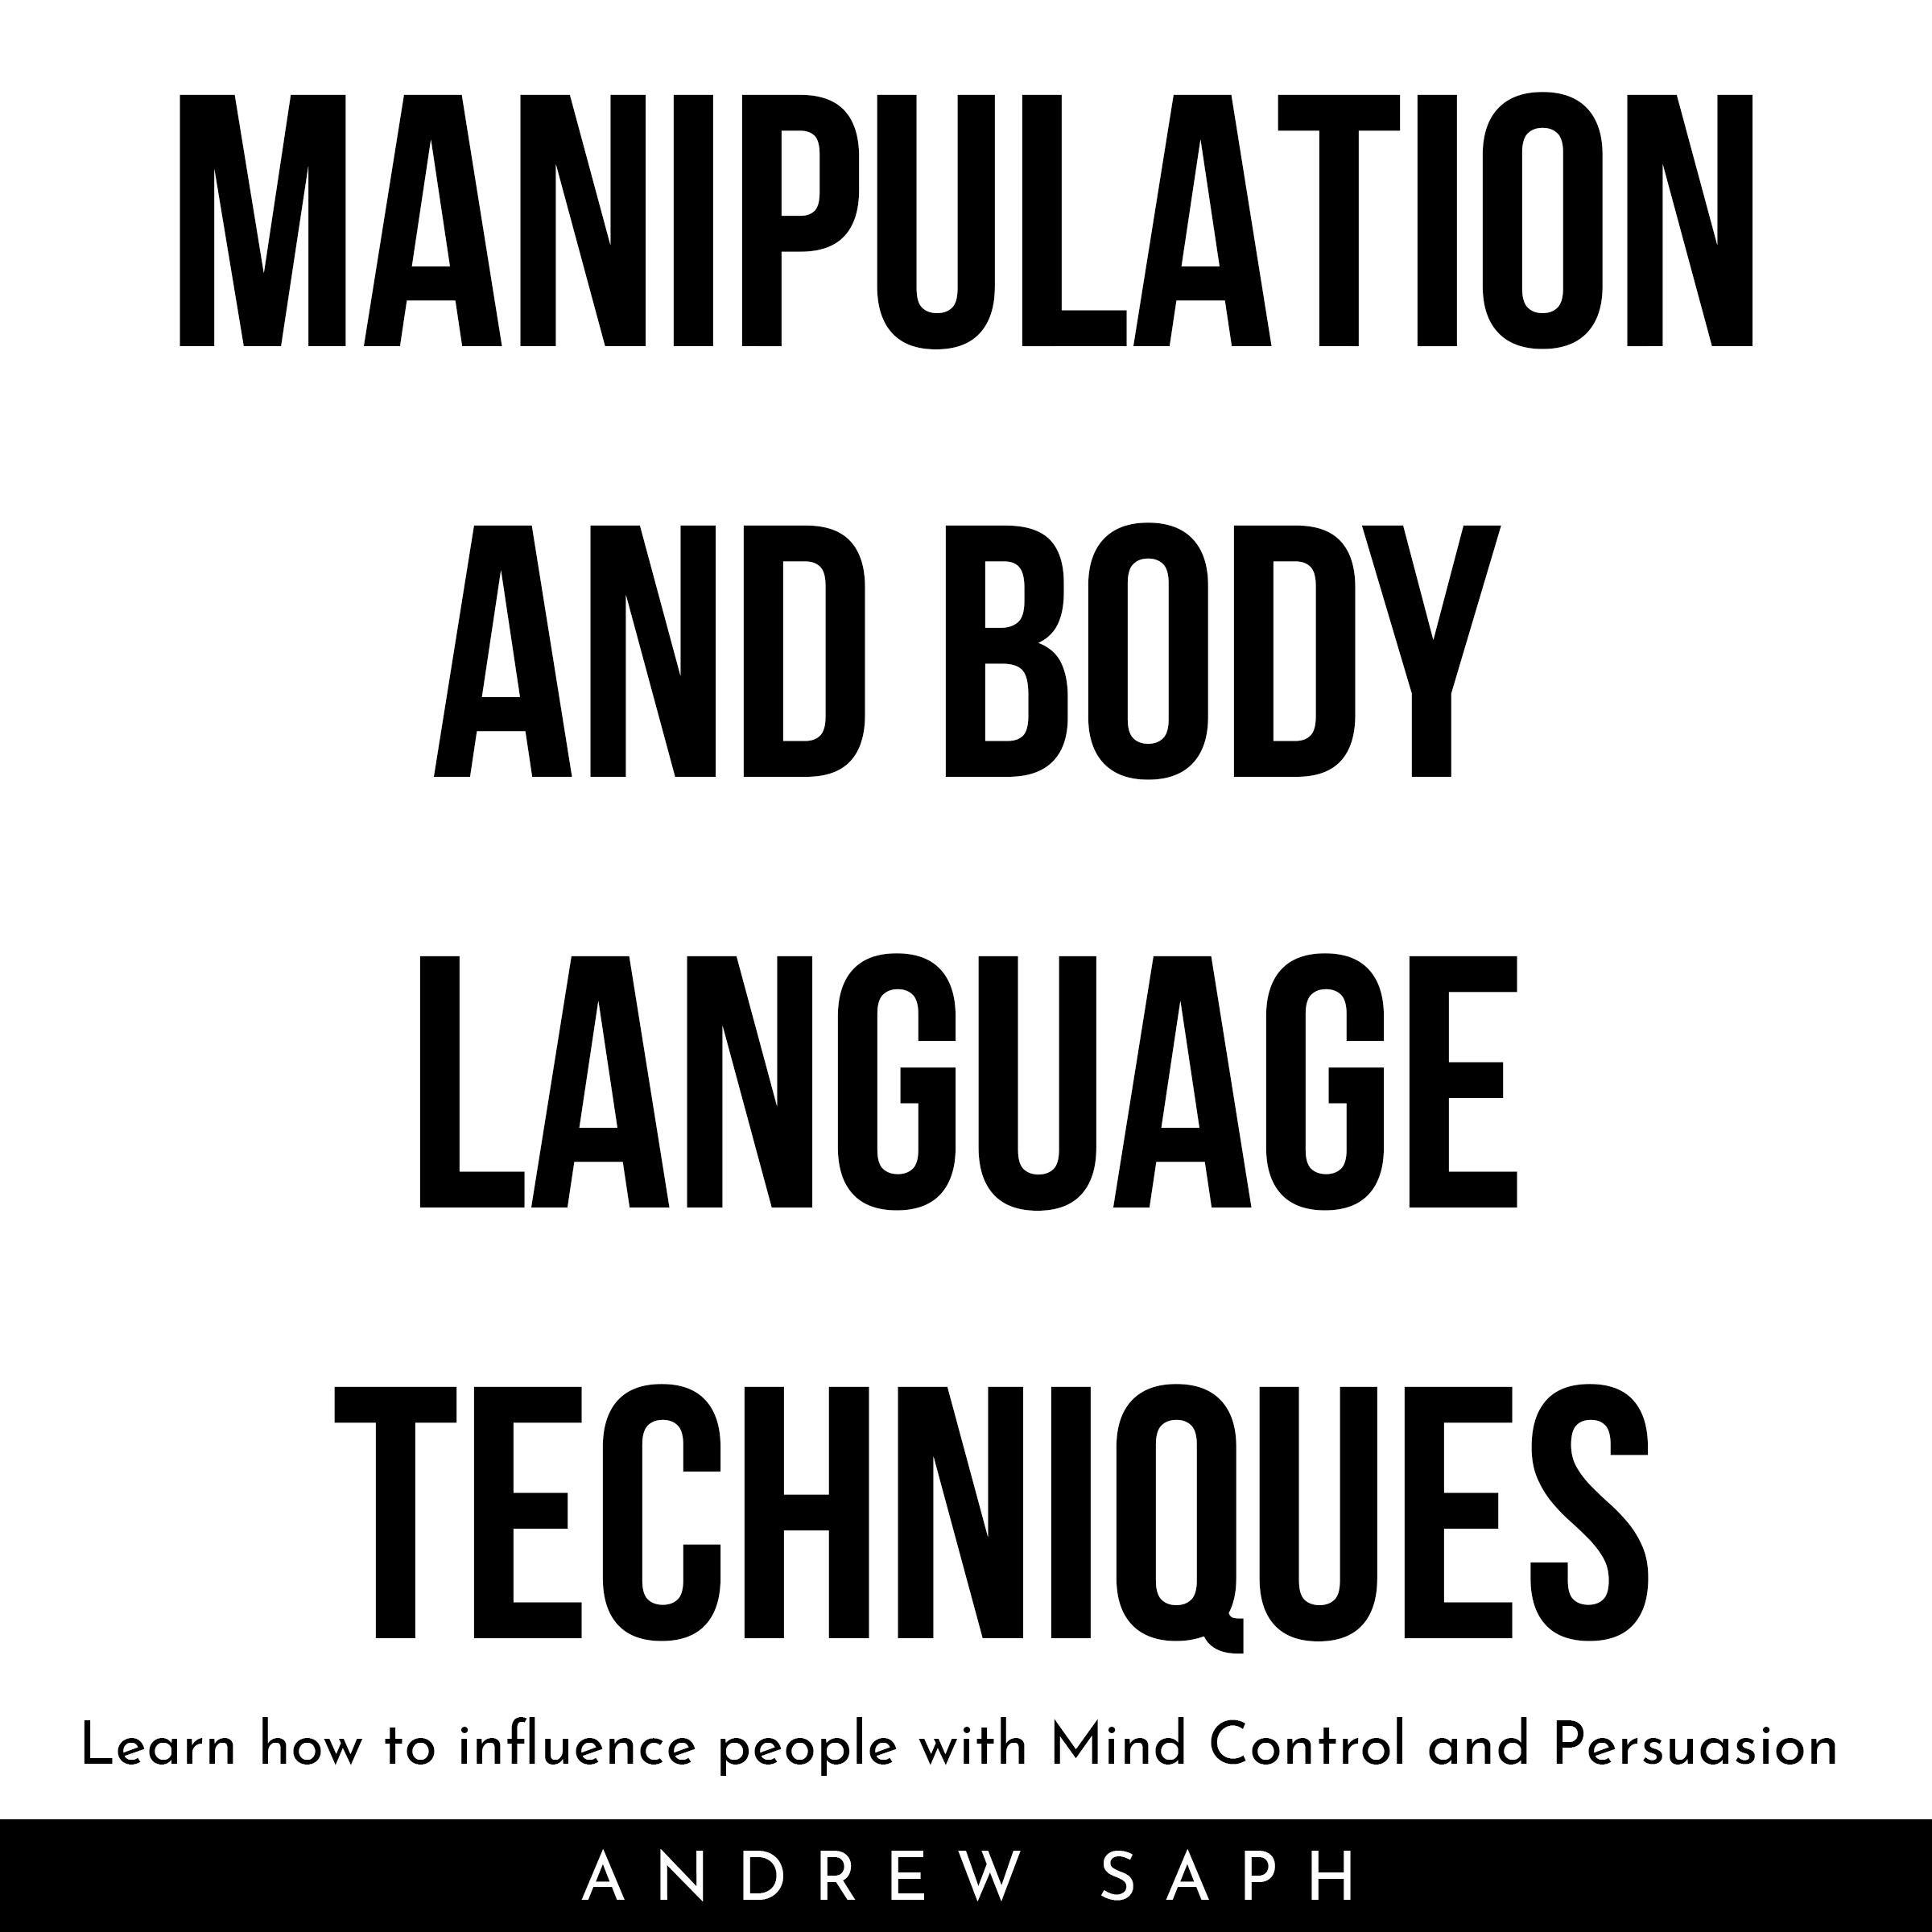 MANIPULATION AND BODY LANGUAGE TECHNIQUES: Learn how to influence people with Mind Control and Persuasion - Andrew Saph